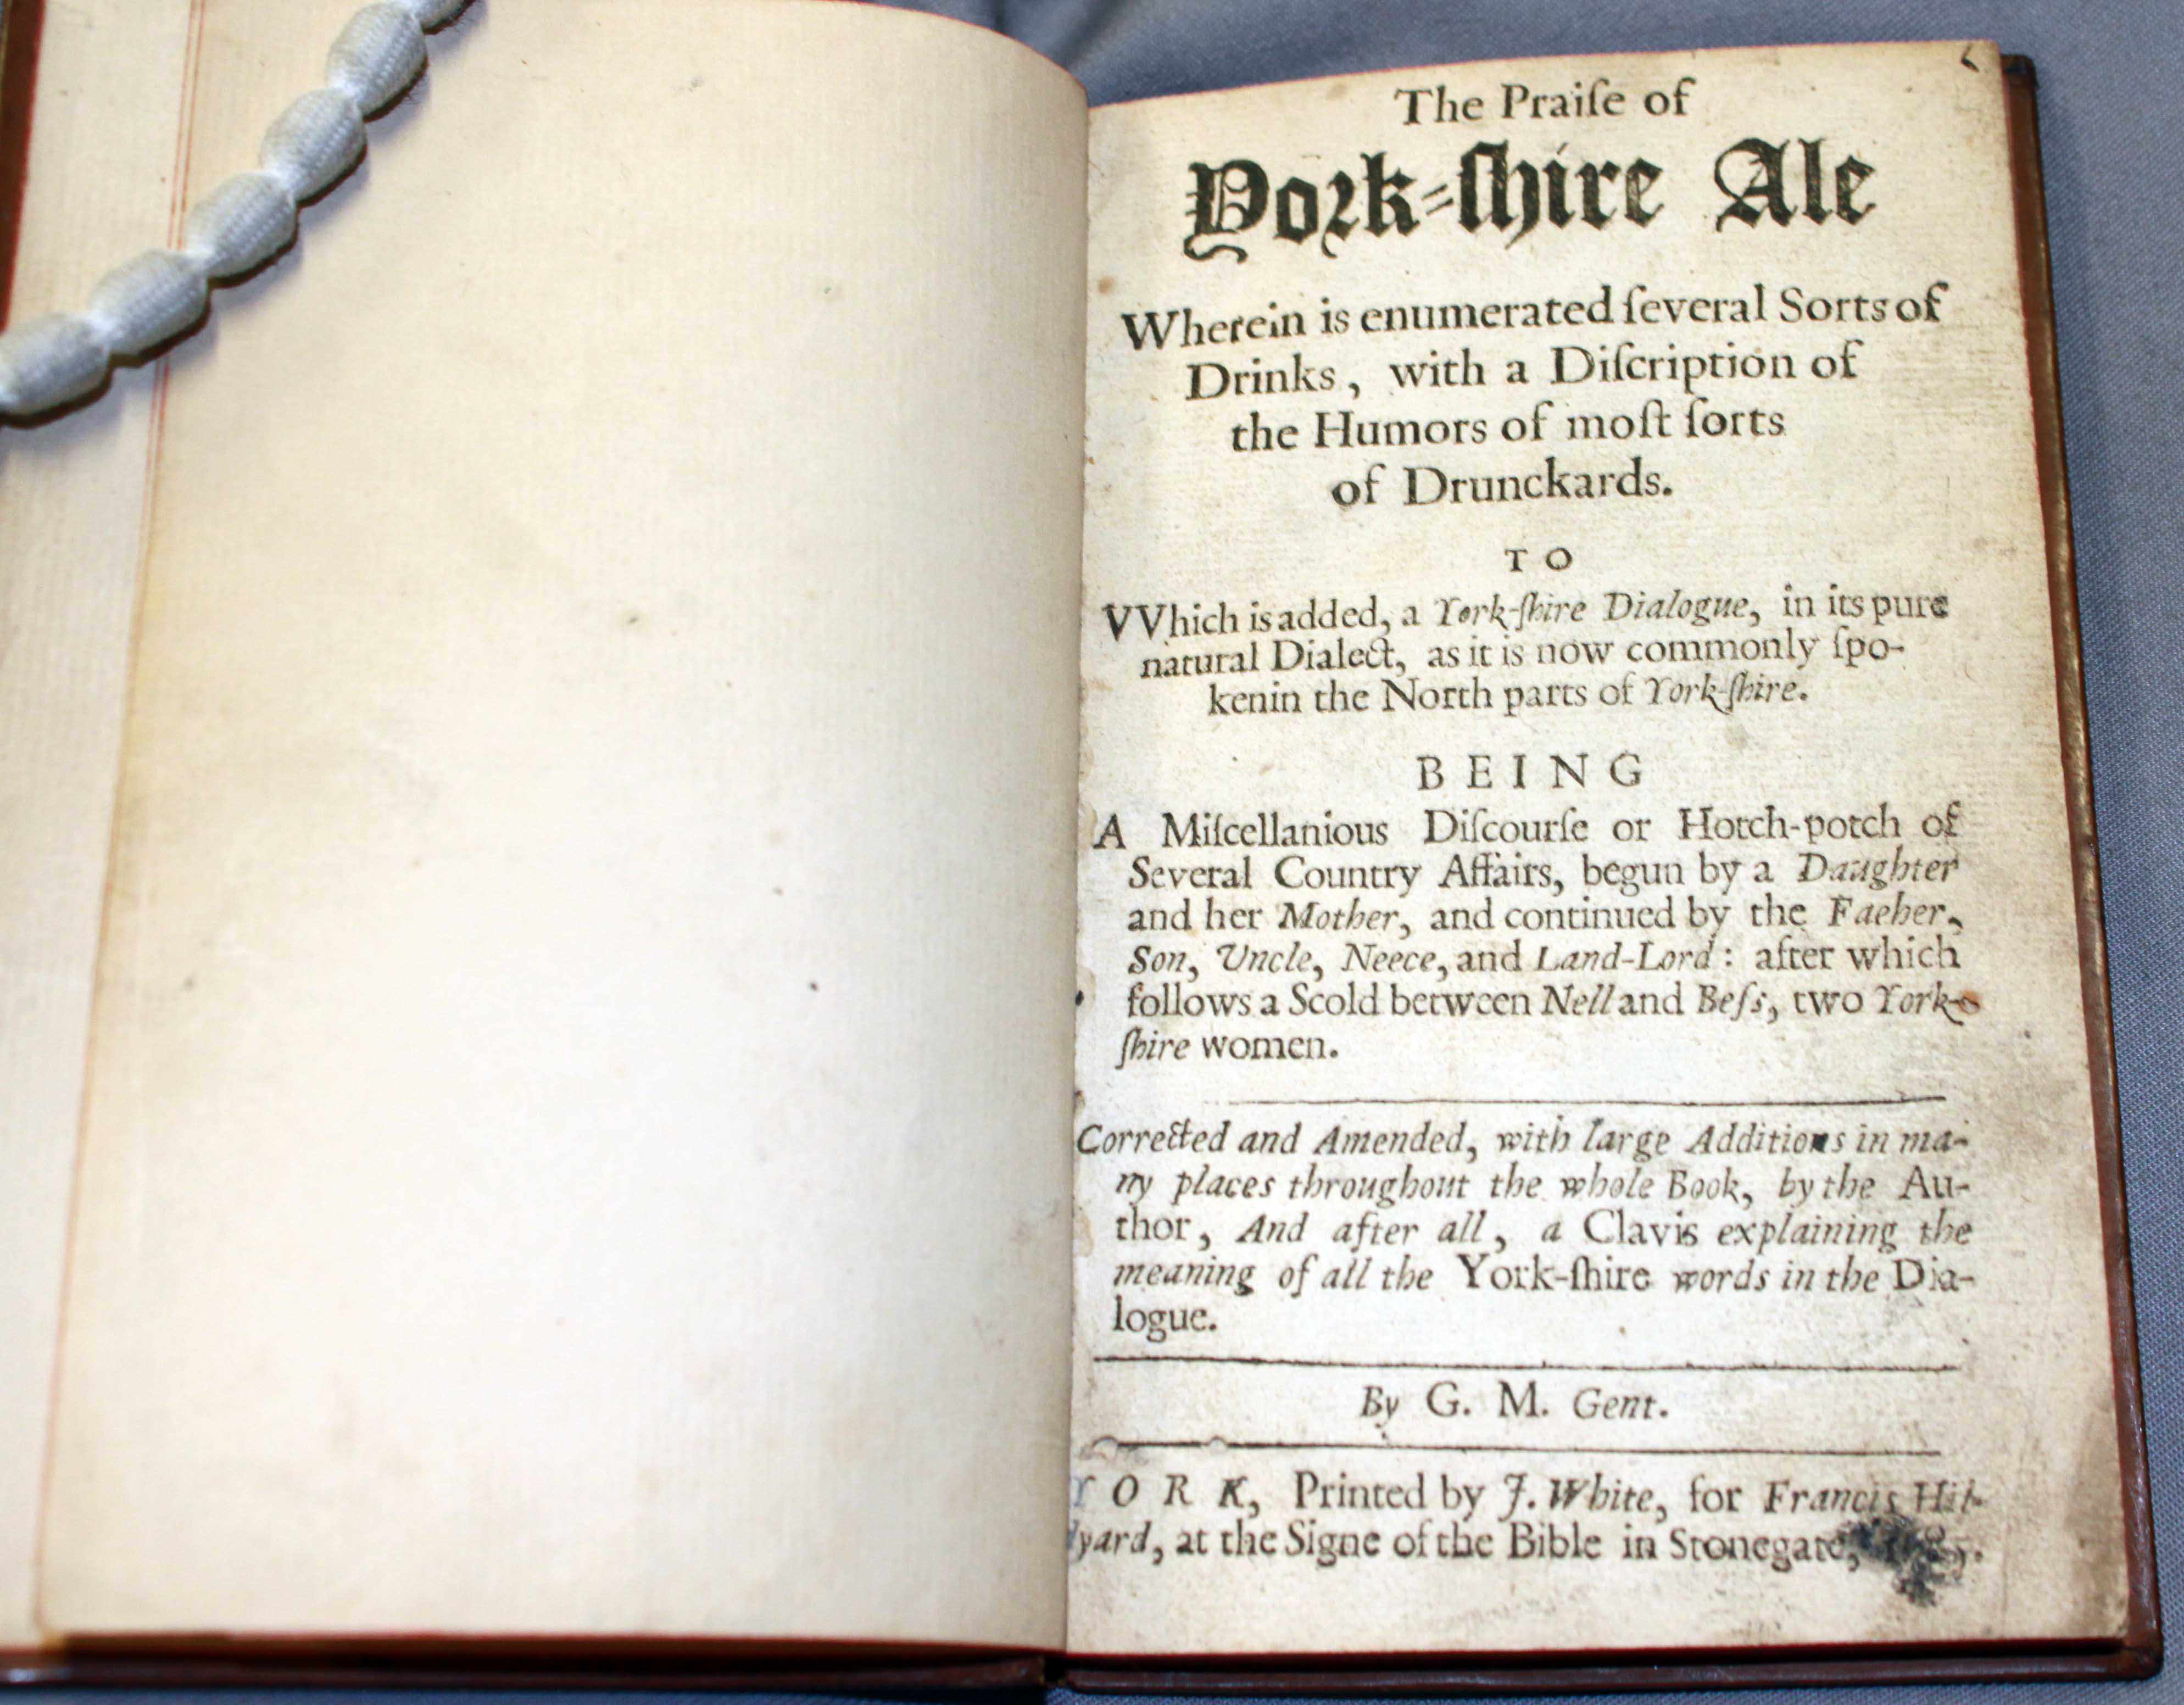 The Praise of Yorkshire Ale” by G. Meriton (1684)